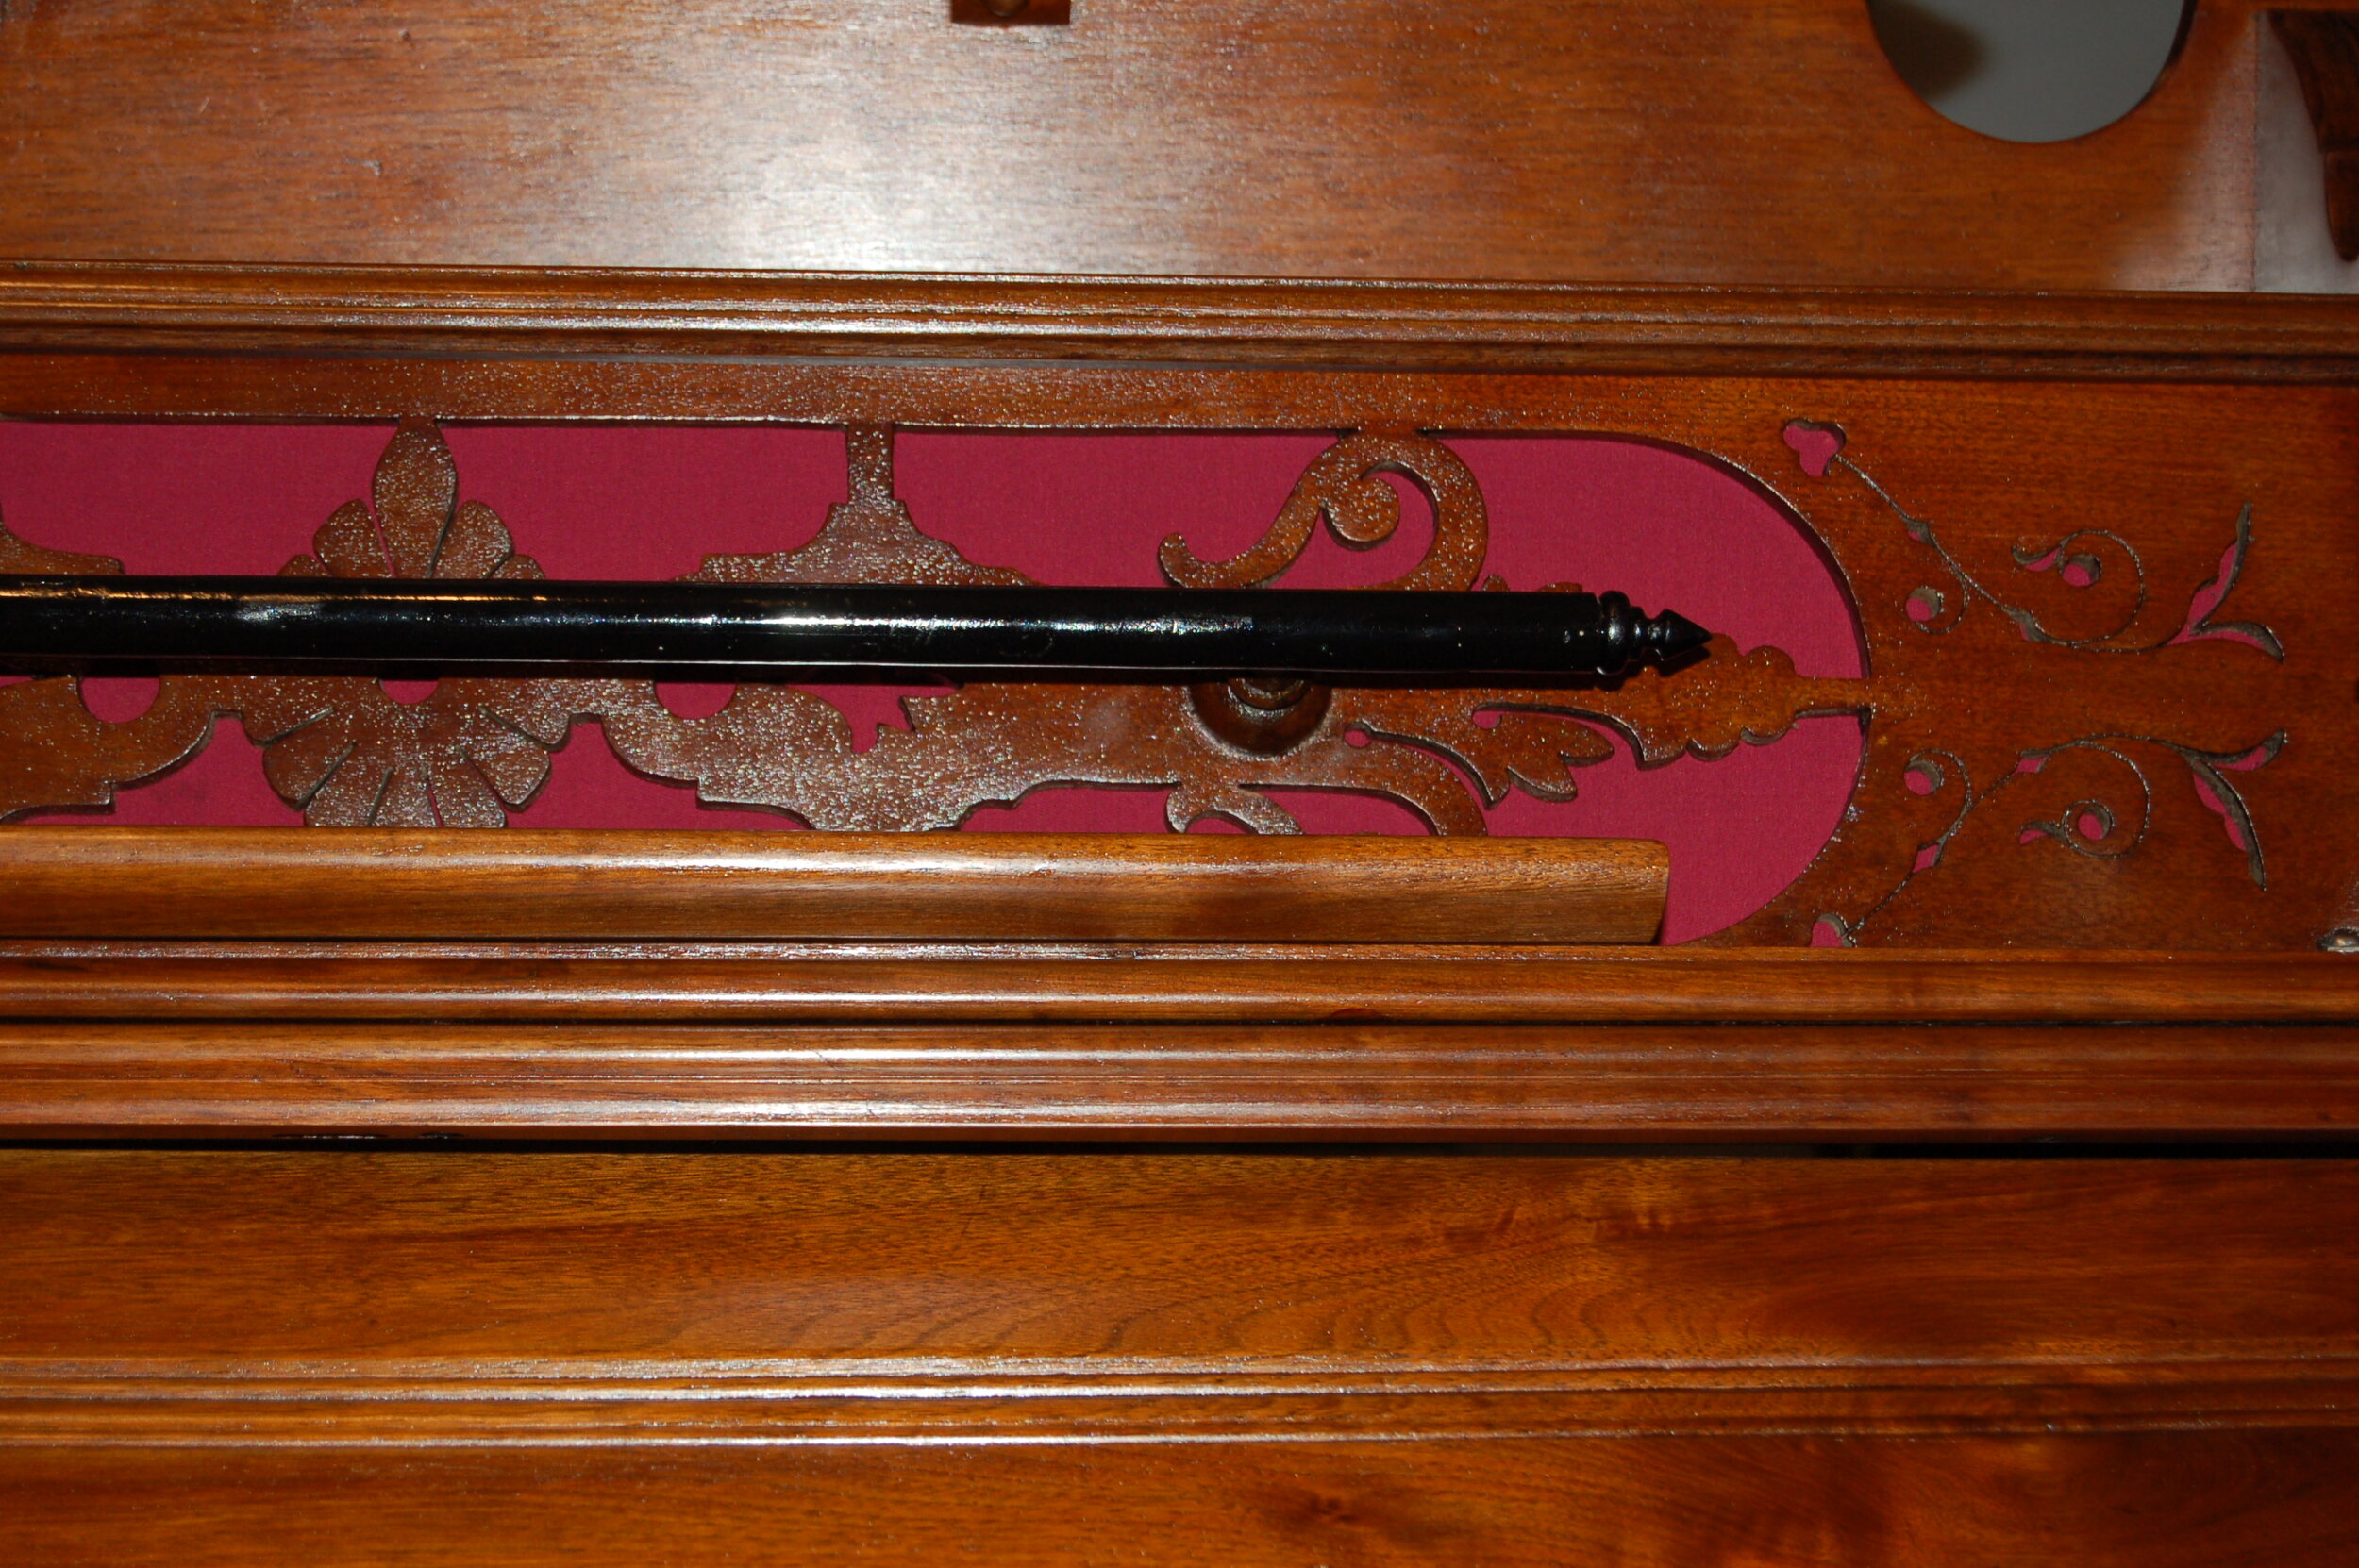  The black bar of the music desk was worm treated, holes filled and painted 